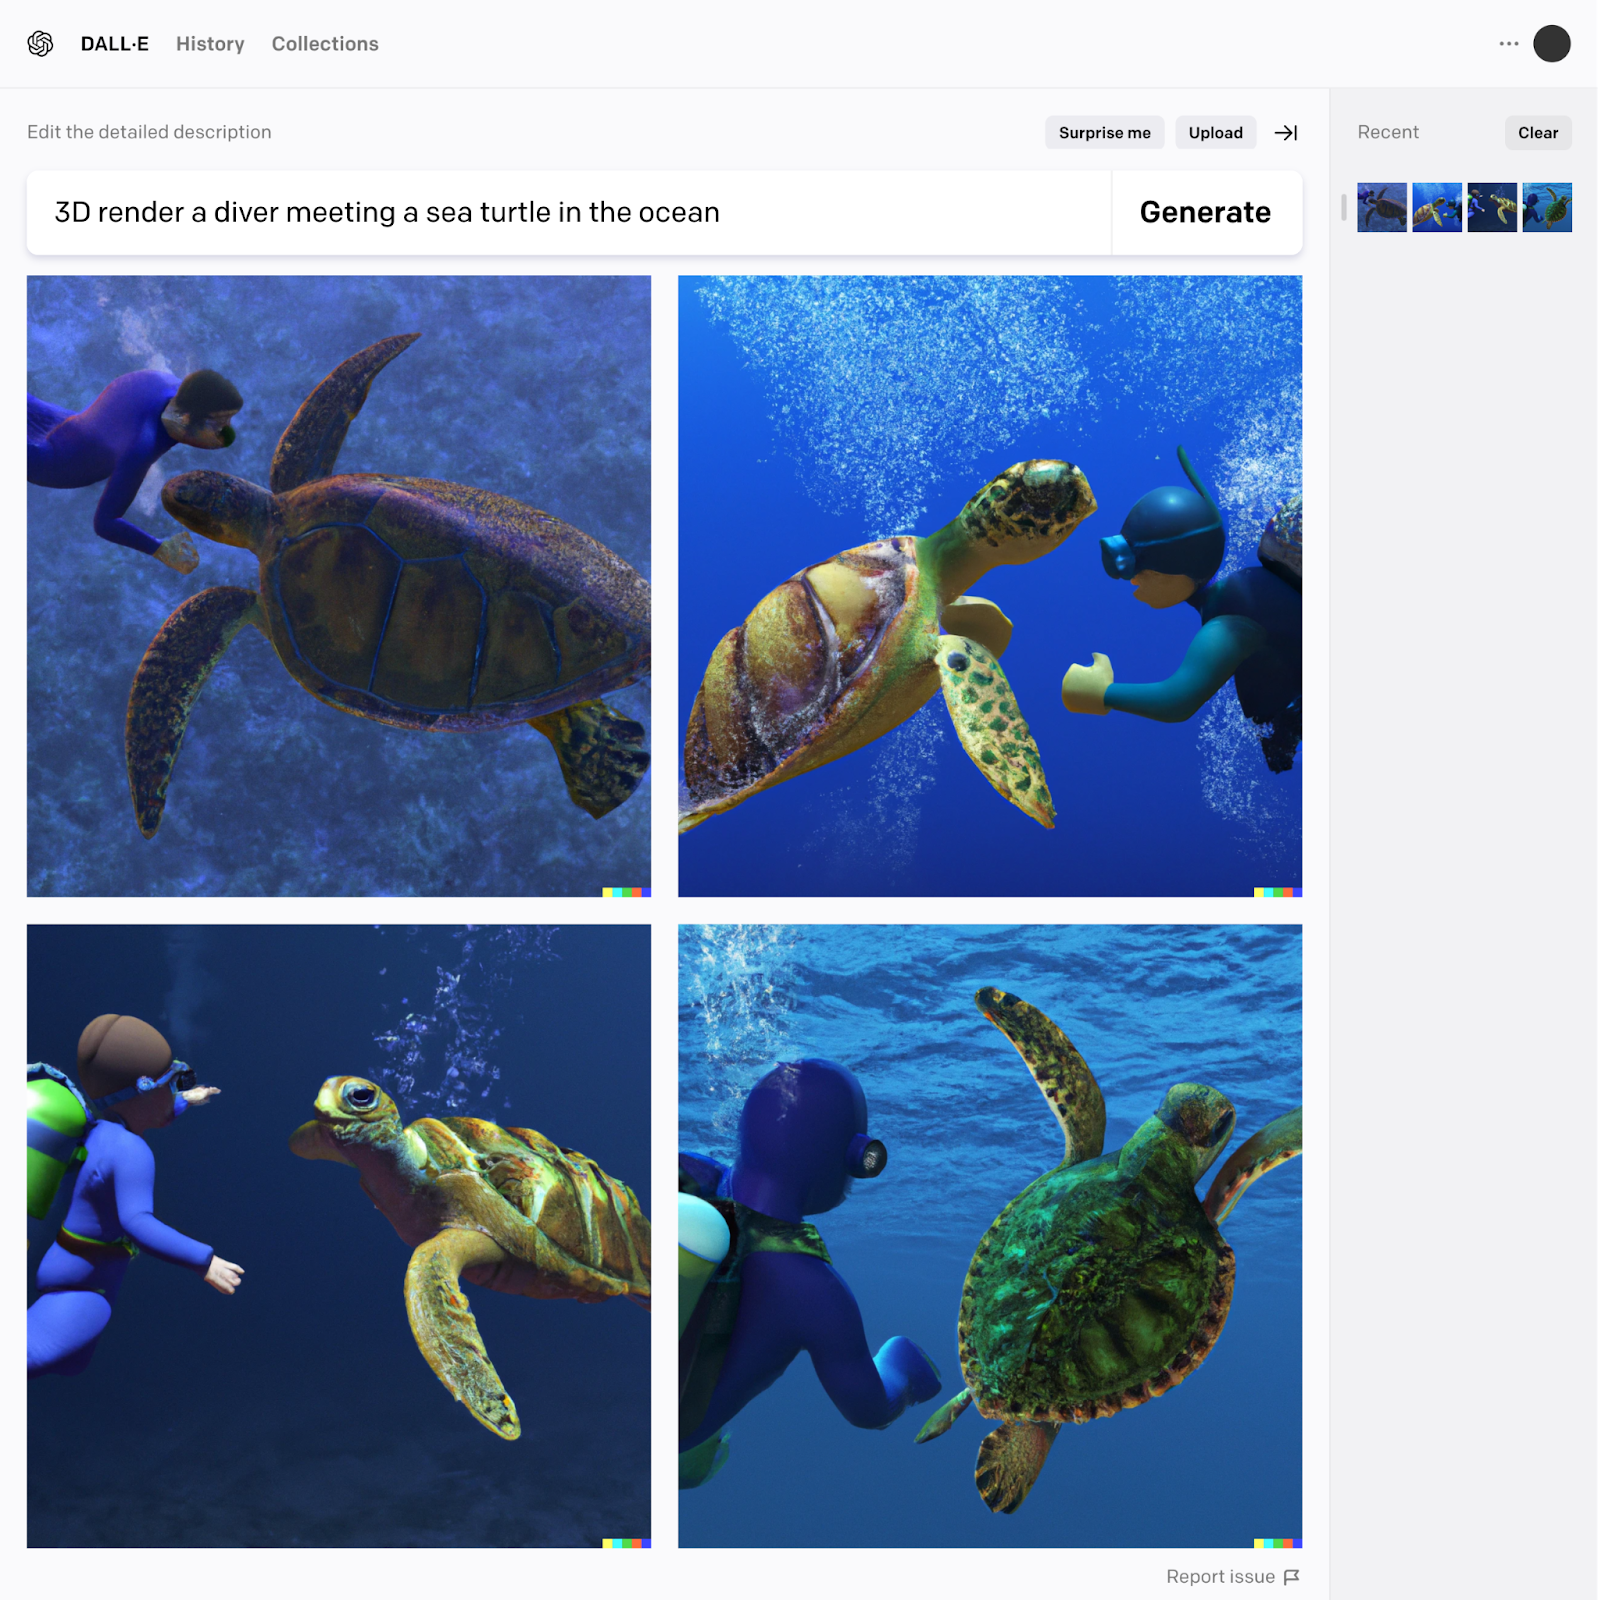 DALL-E results for “3D render a diver meeting a sea turtle in the ocean” prompt